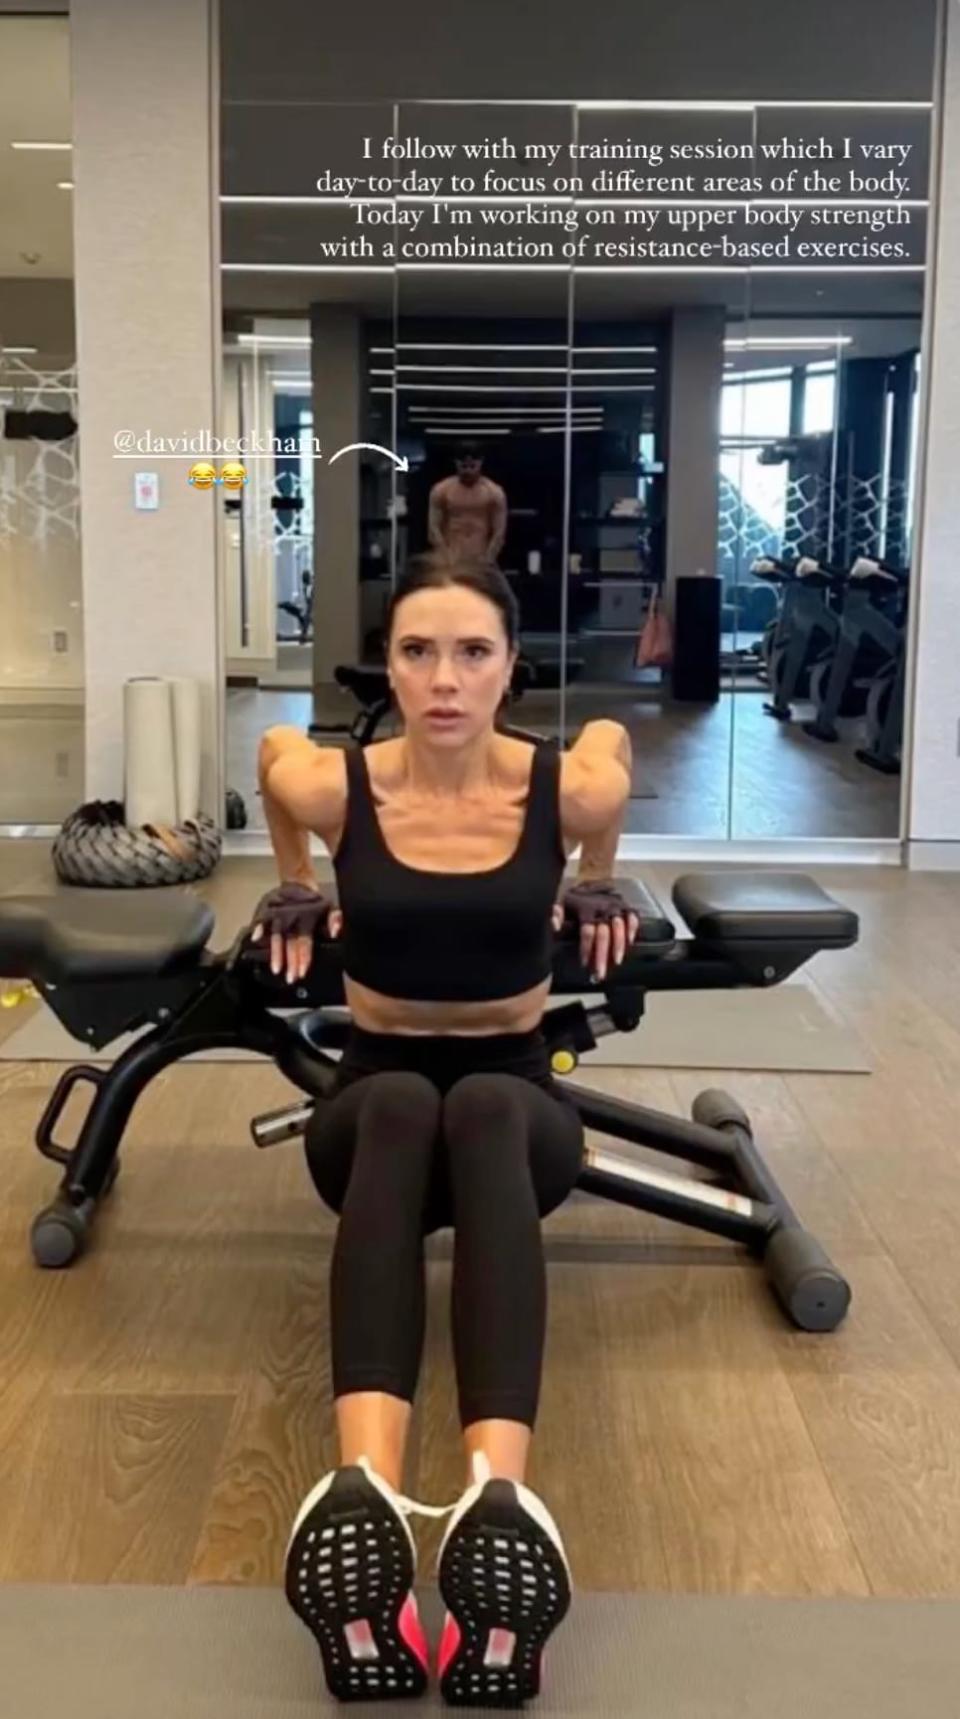 David Beckham featured in the background of Victoria's workout snap